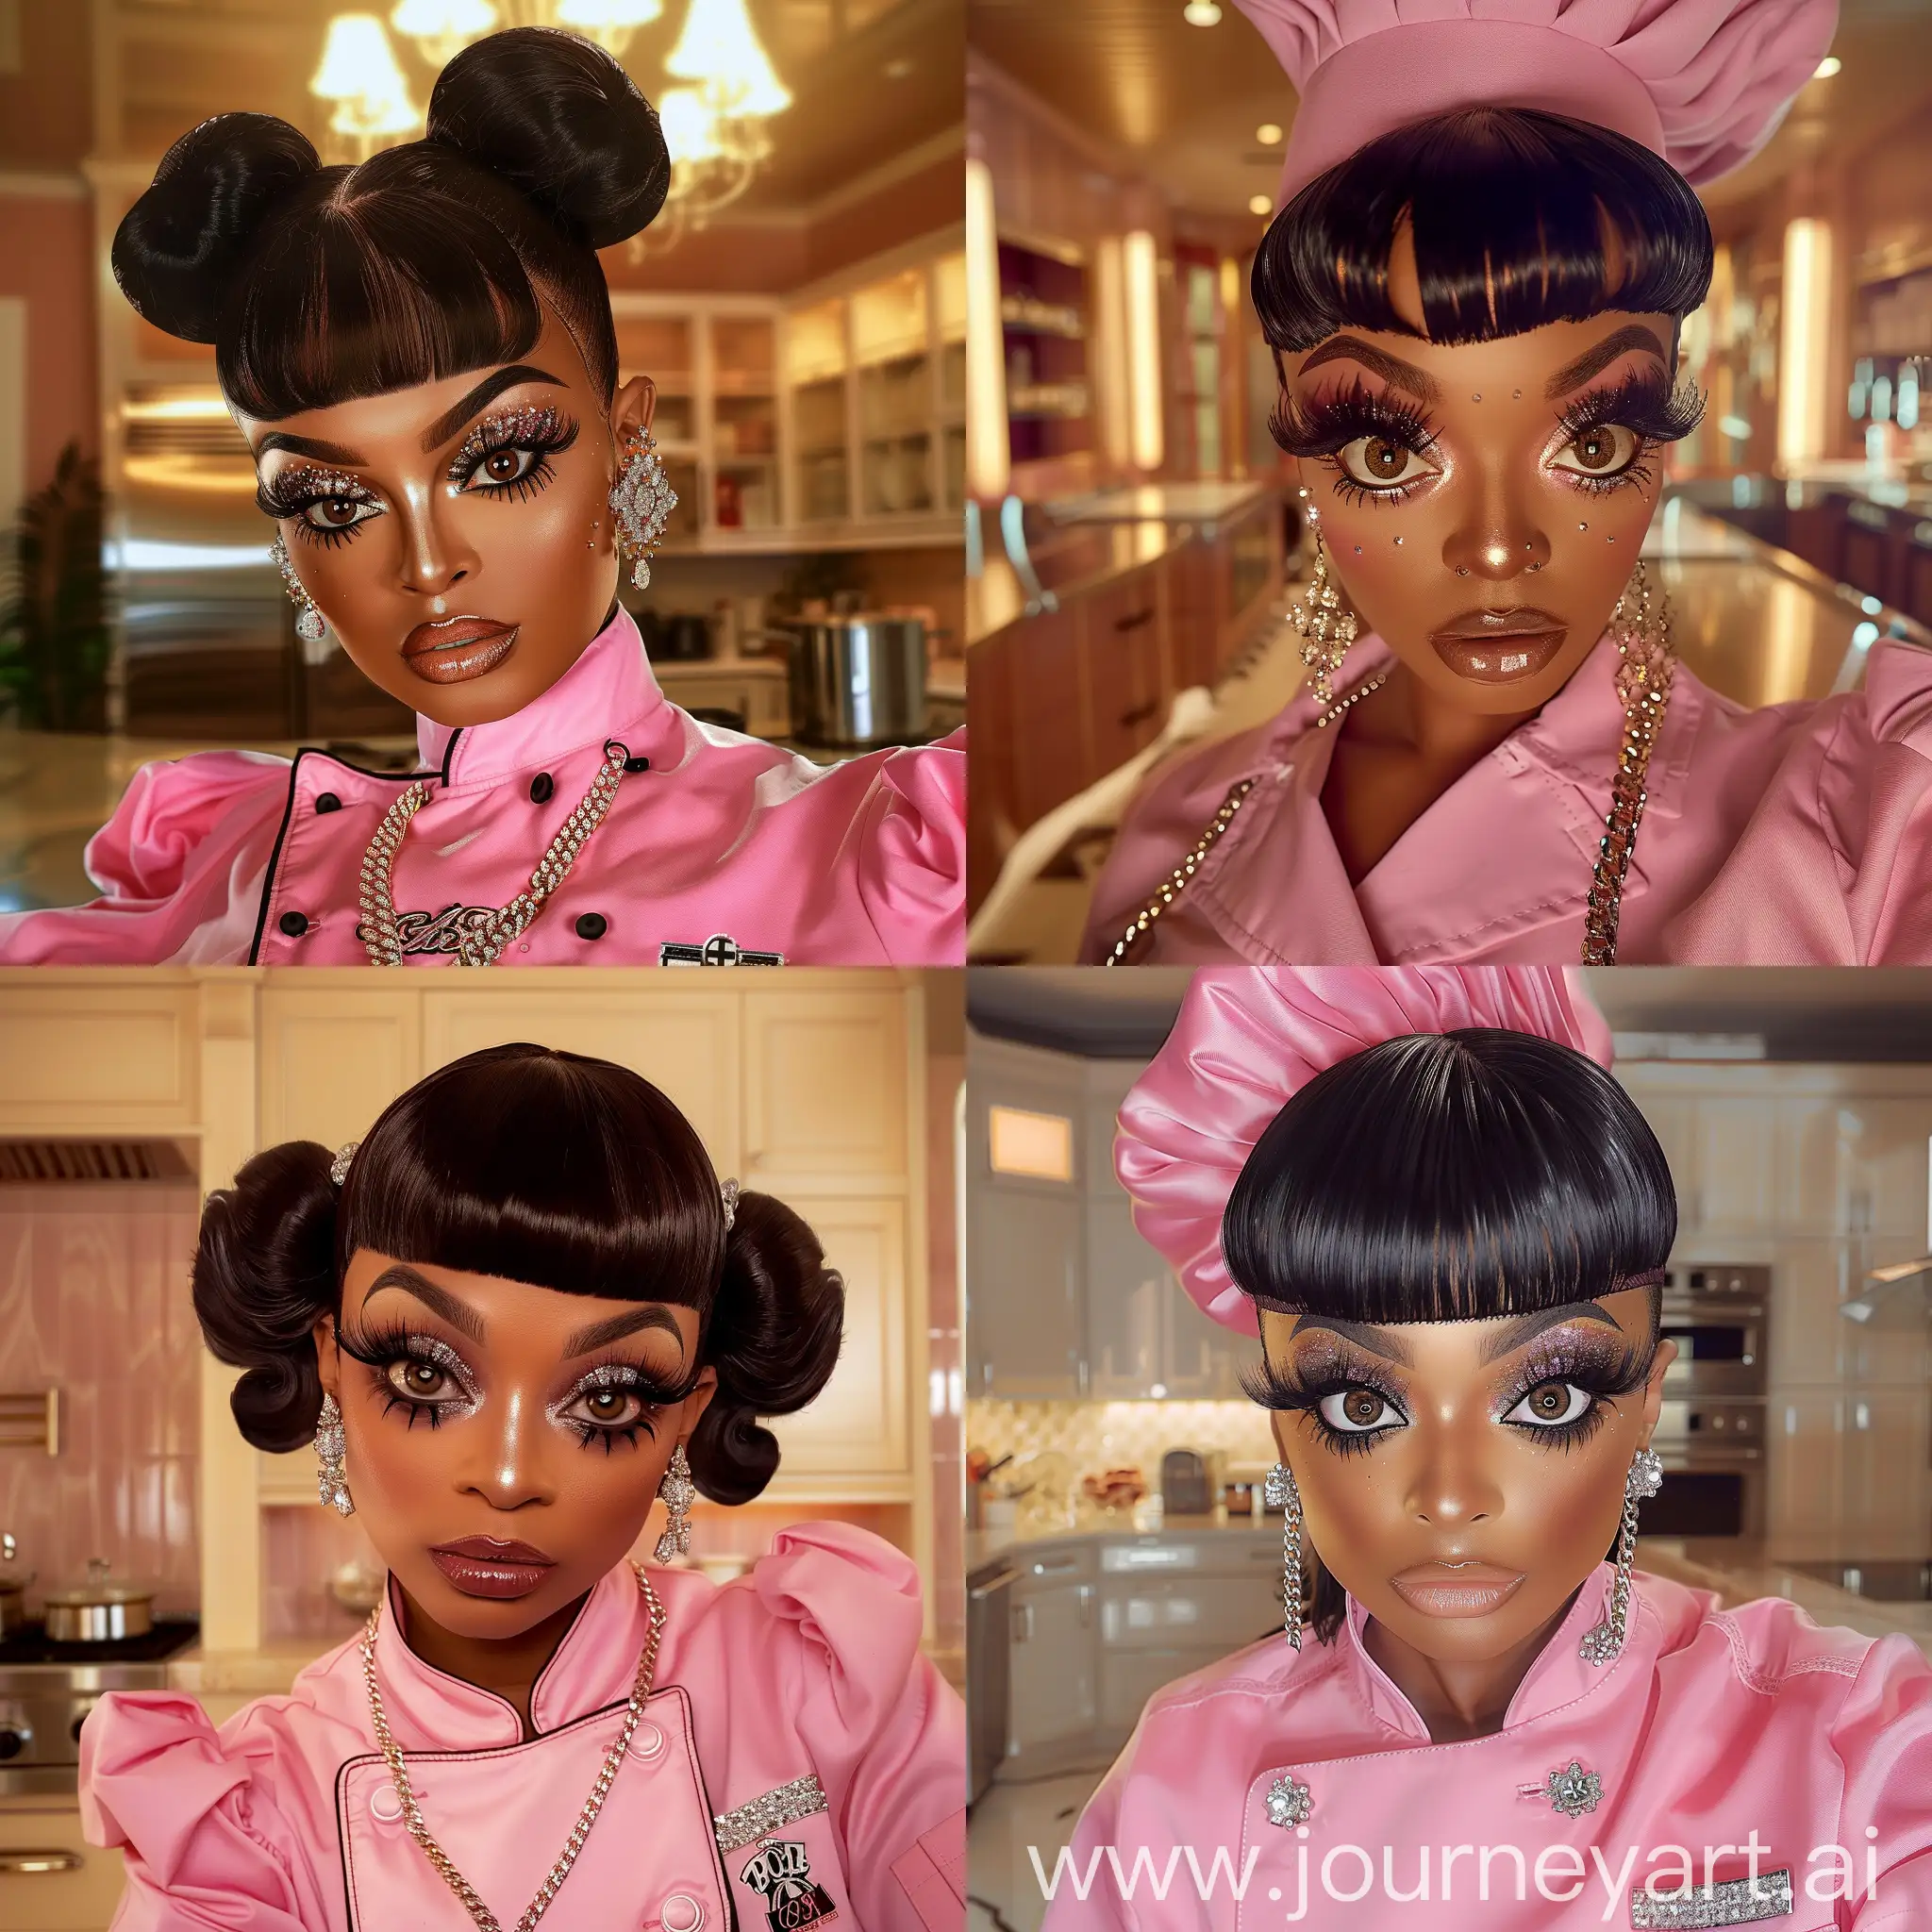 Glamorous-African-American-Betty-Boop-in-Pink-Chefs-Uniform-Posing-in-Luxury-Kitchen